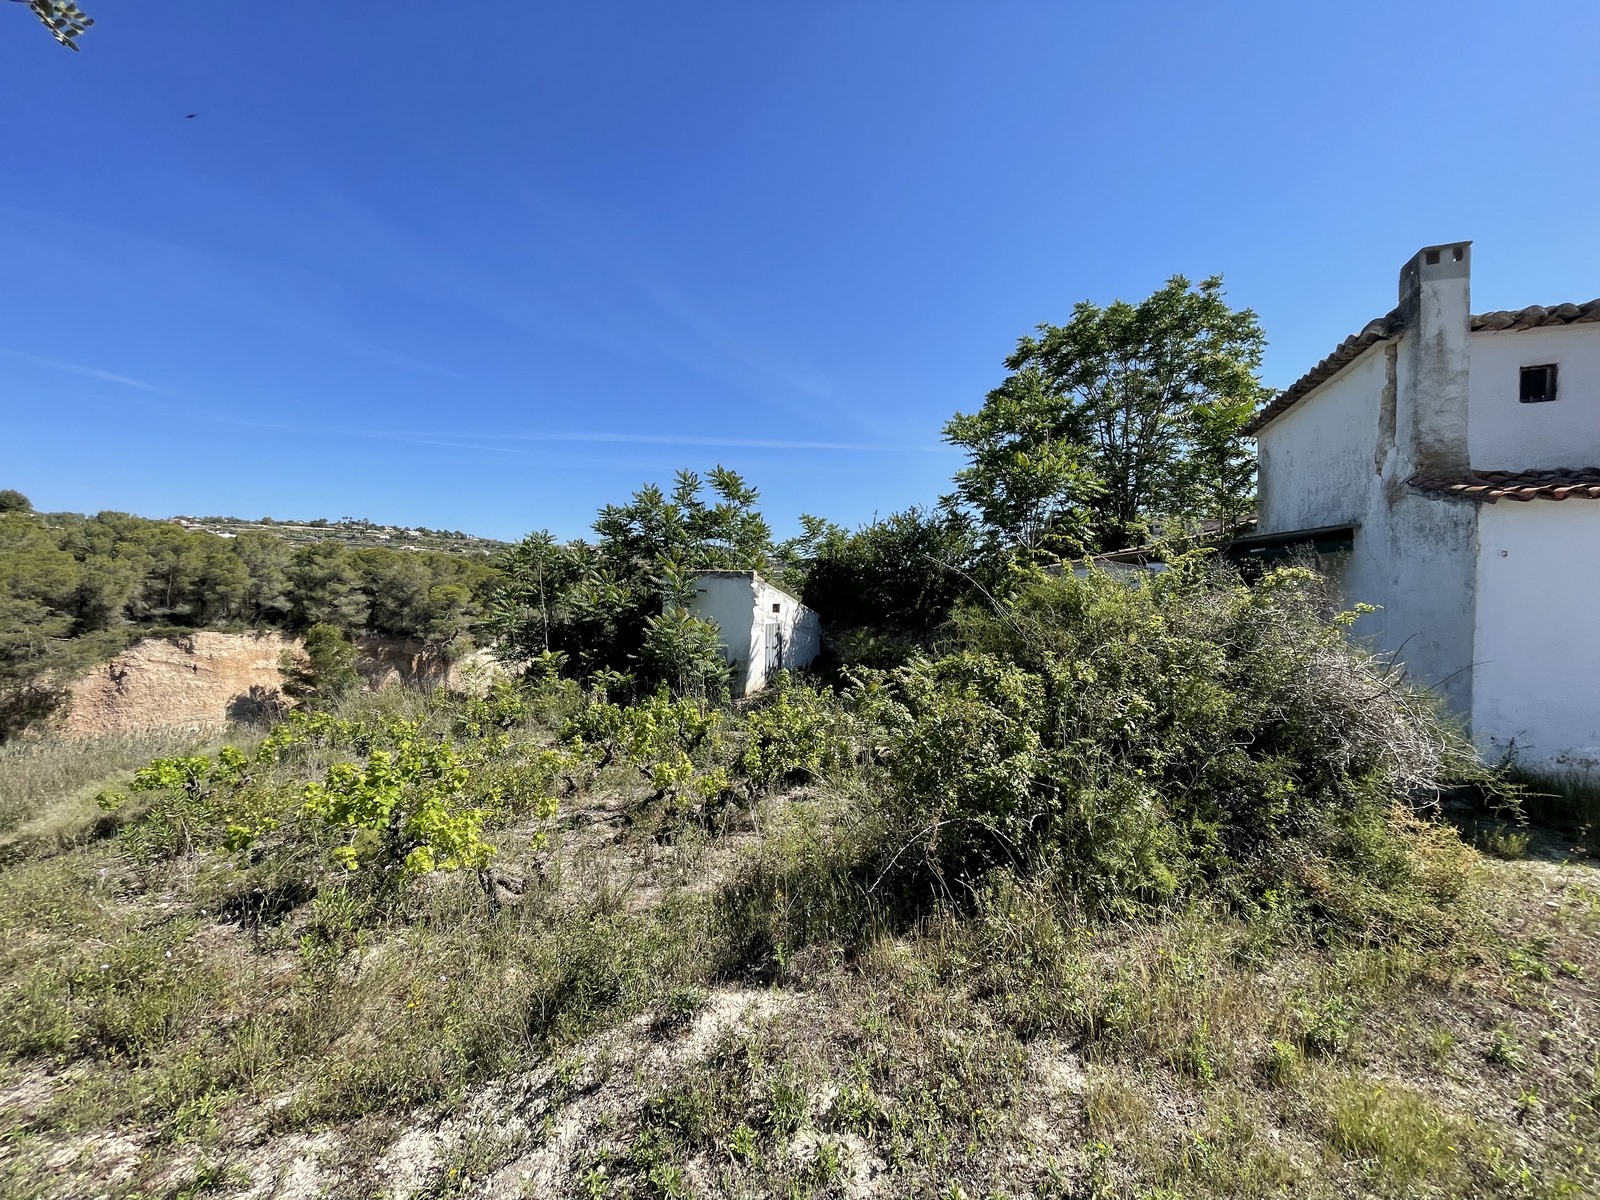 Two plots and a semi-datached finca to reform for sale in Teulada, Moraira.